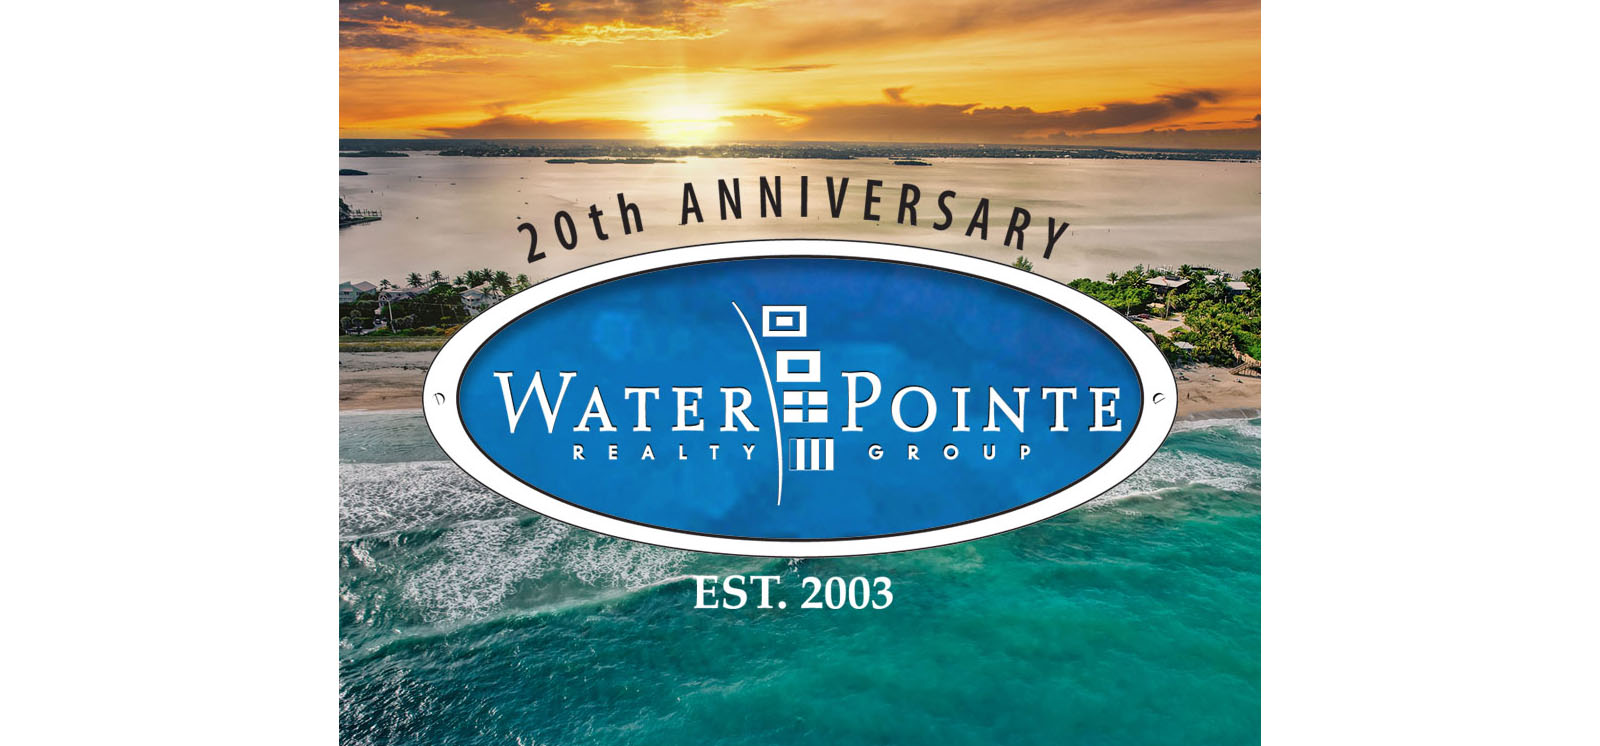 Water Pointe Realty Group Celebrates 20th Anniversary